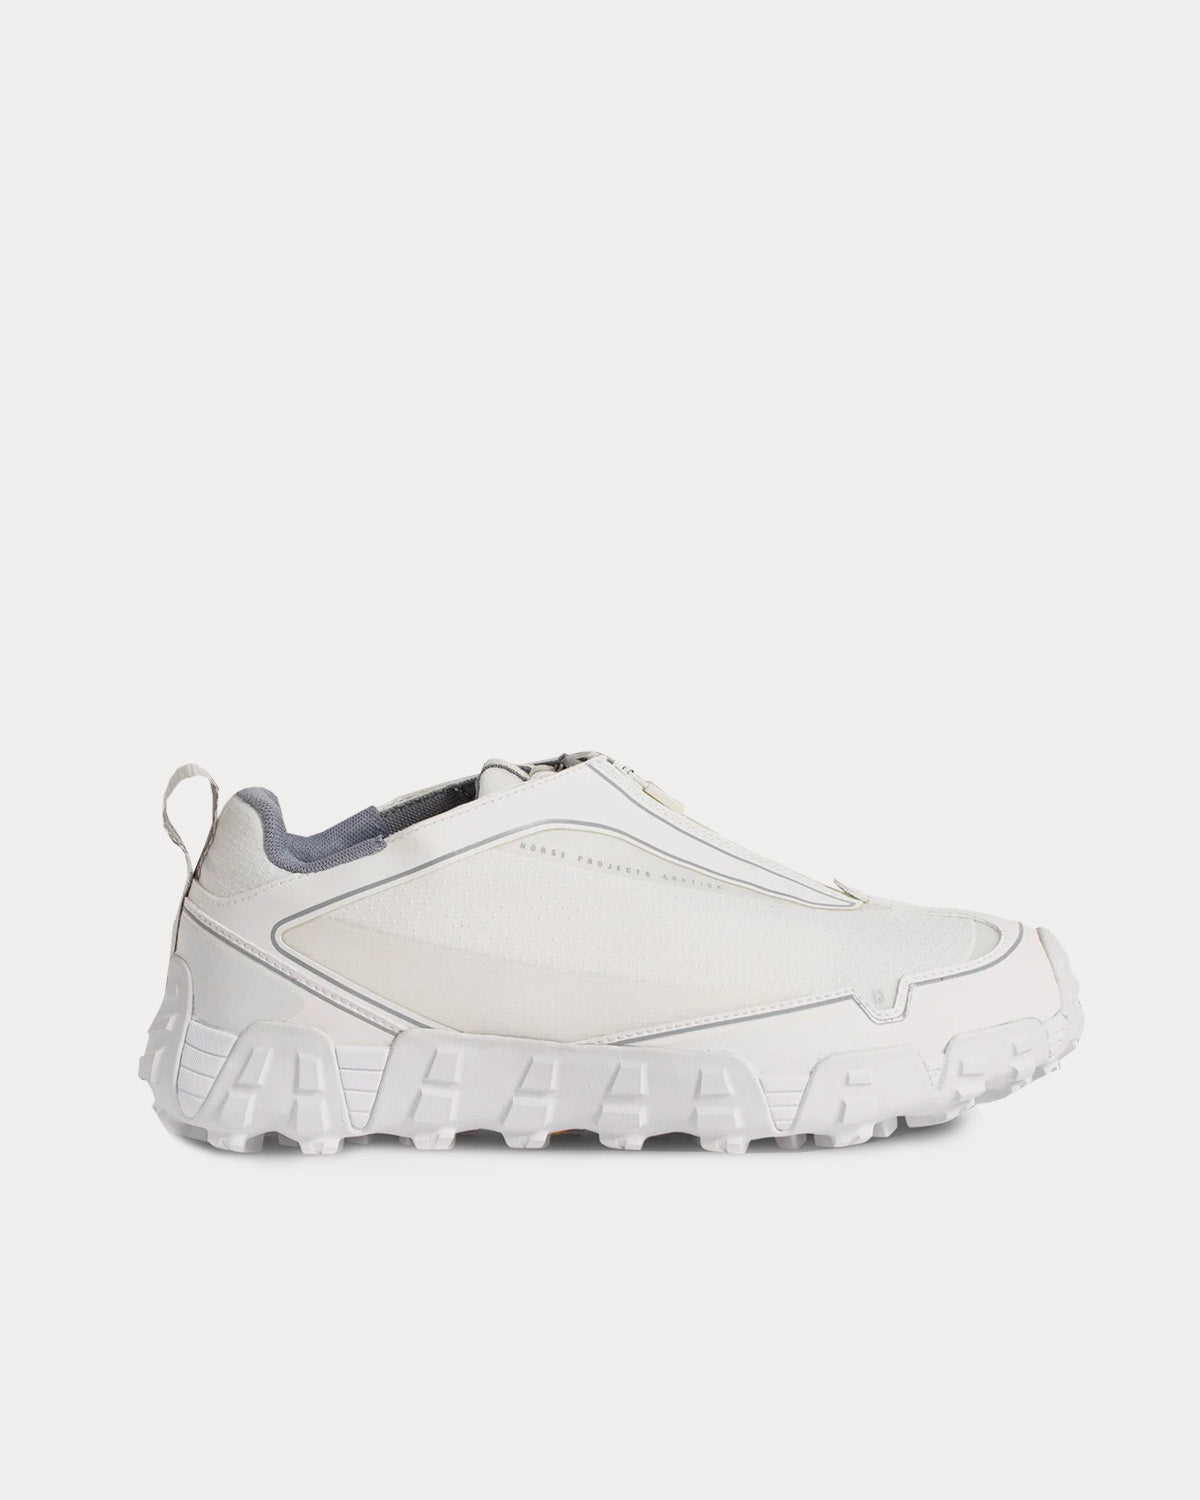 Norse Projects - ARKTISK Zip Up Runner White Running Shoes